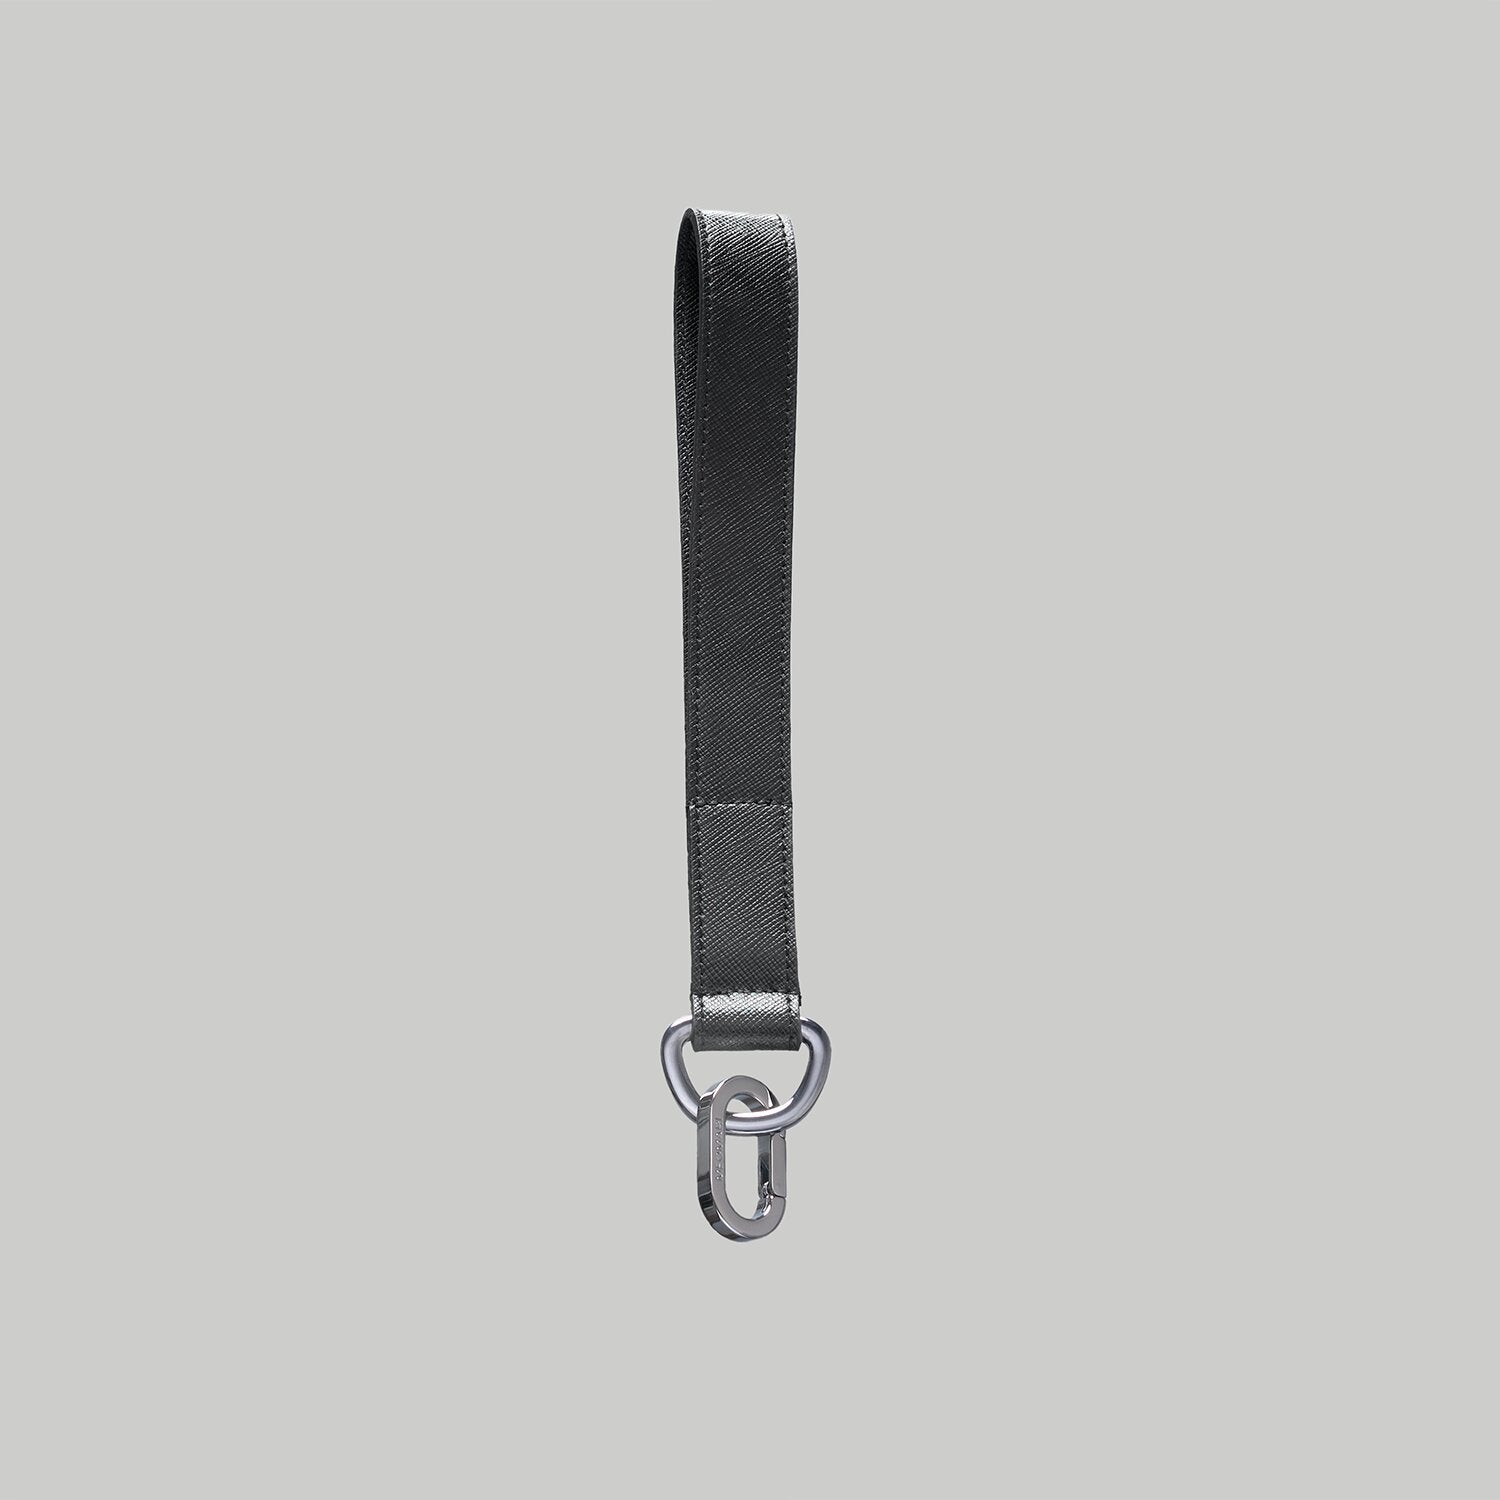 Luxury dog leash handle in black Saffiano leather with Ruthenium